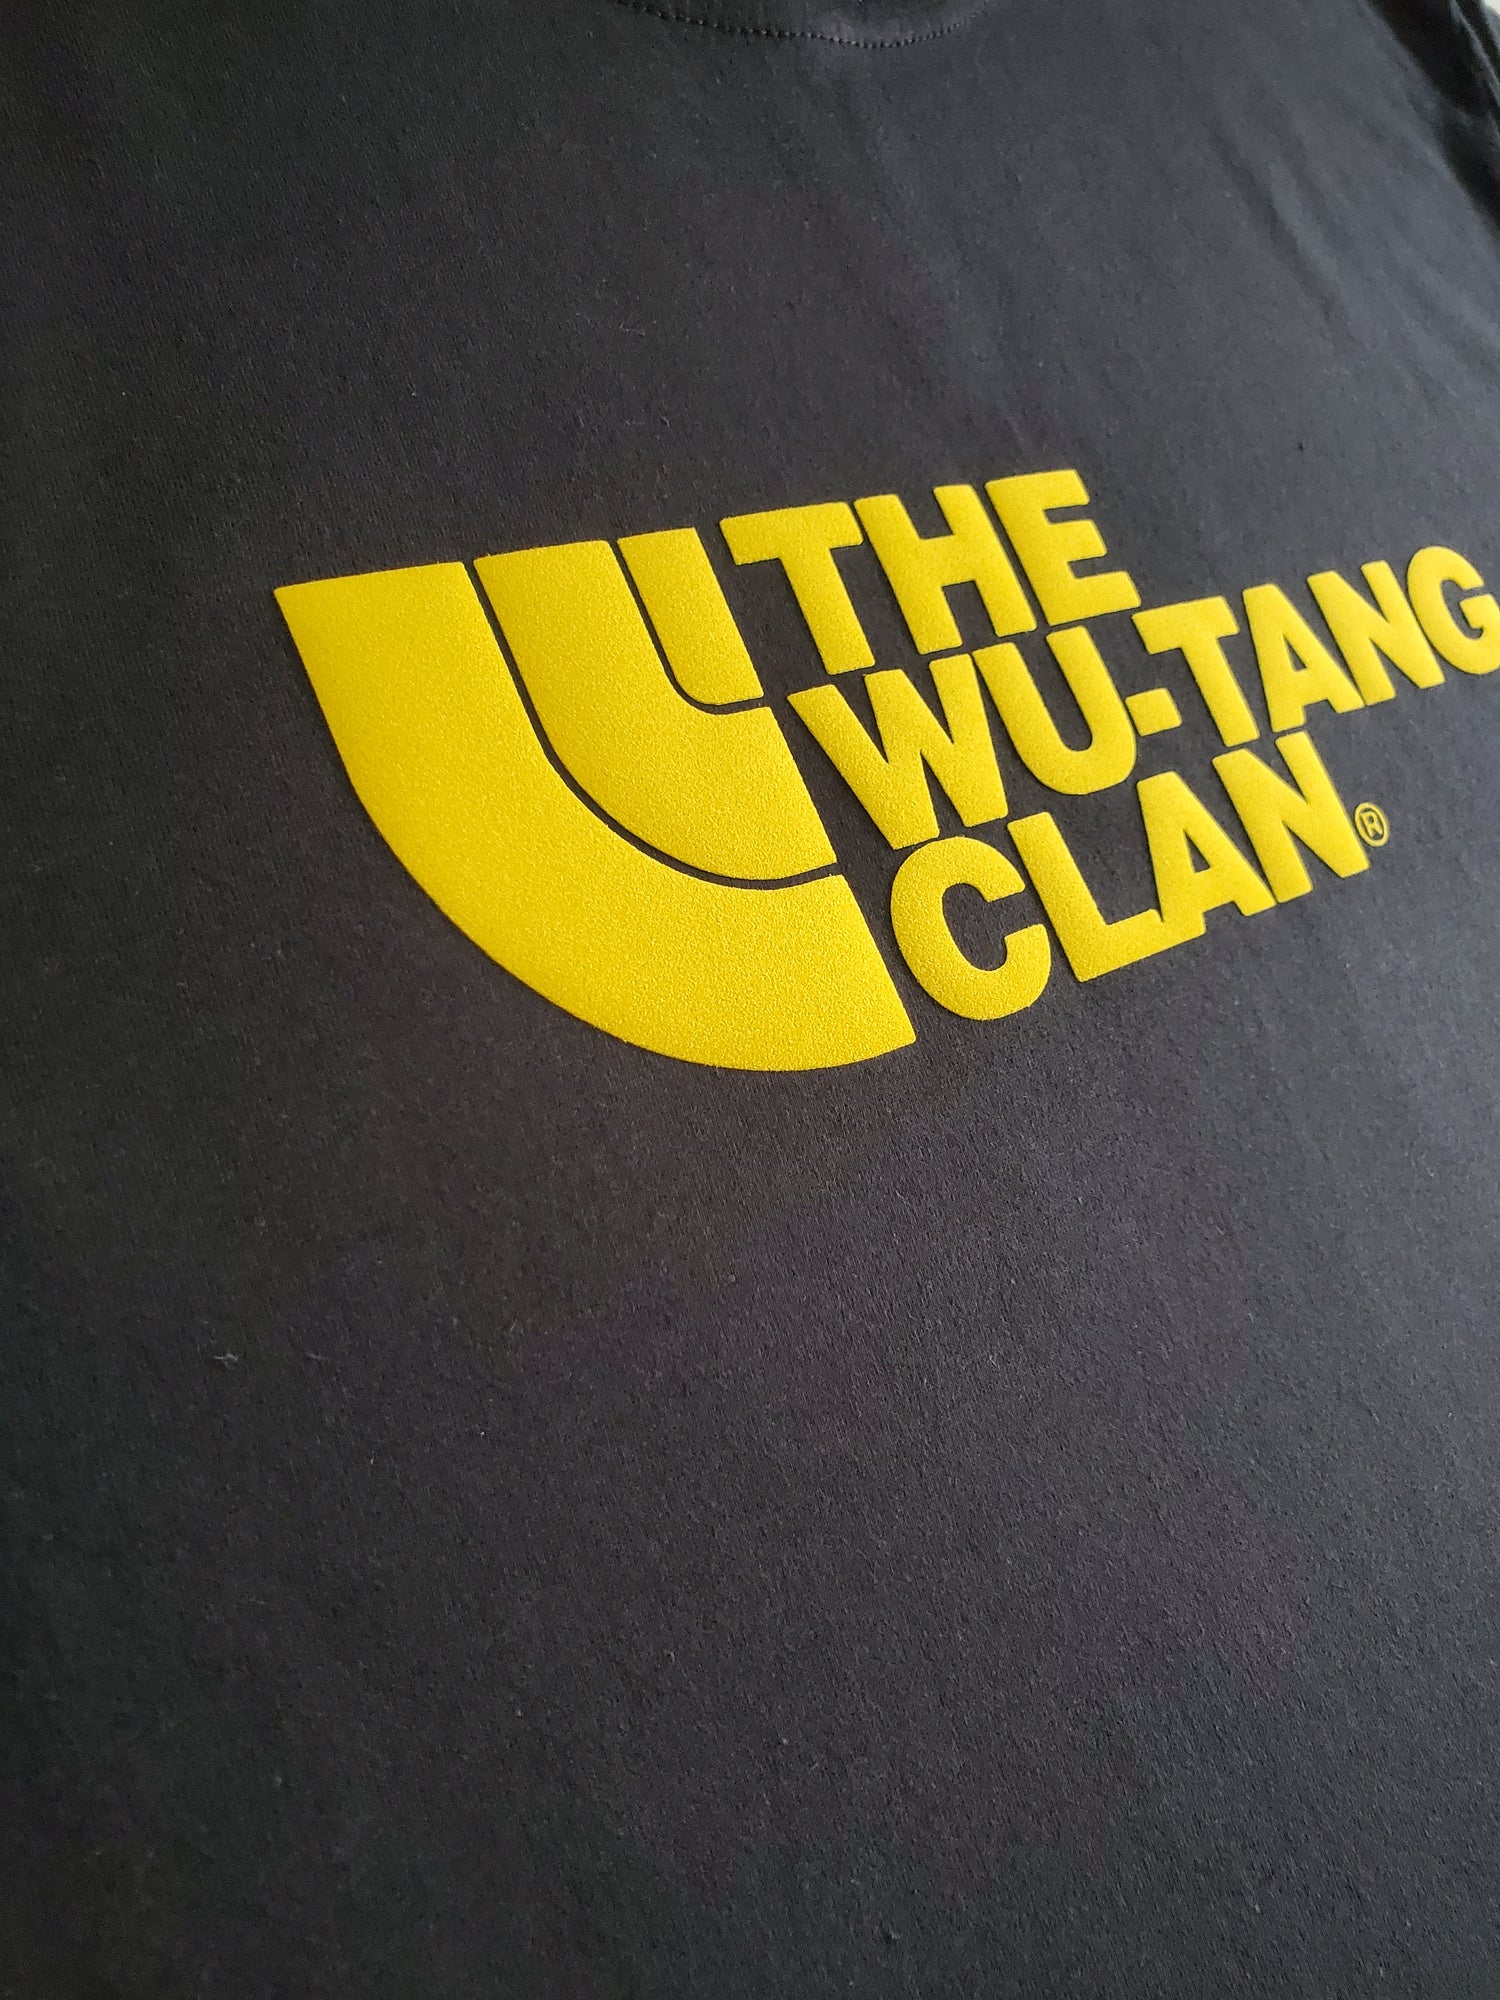 The Wu Face T-Shirt - Centre Ave Clothing Co.